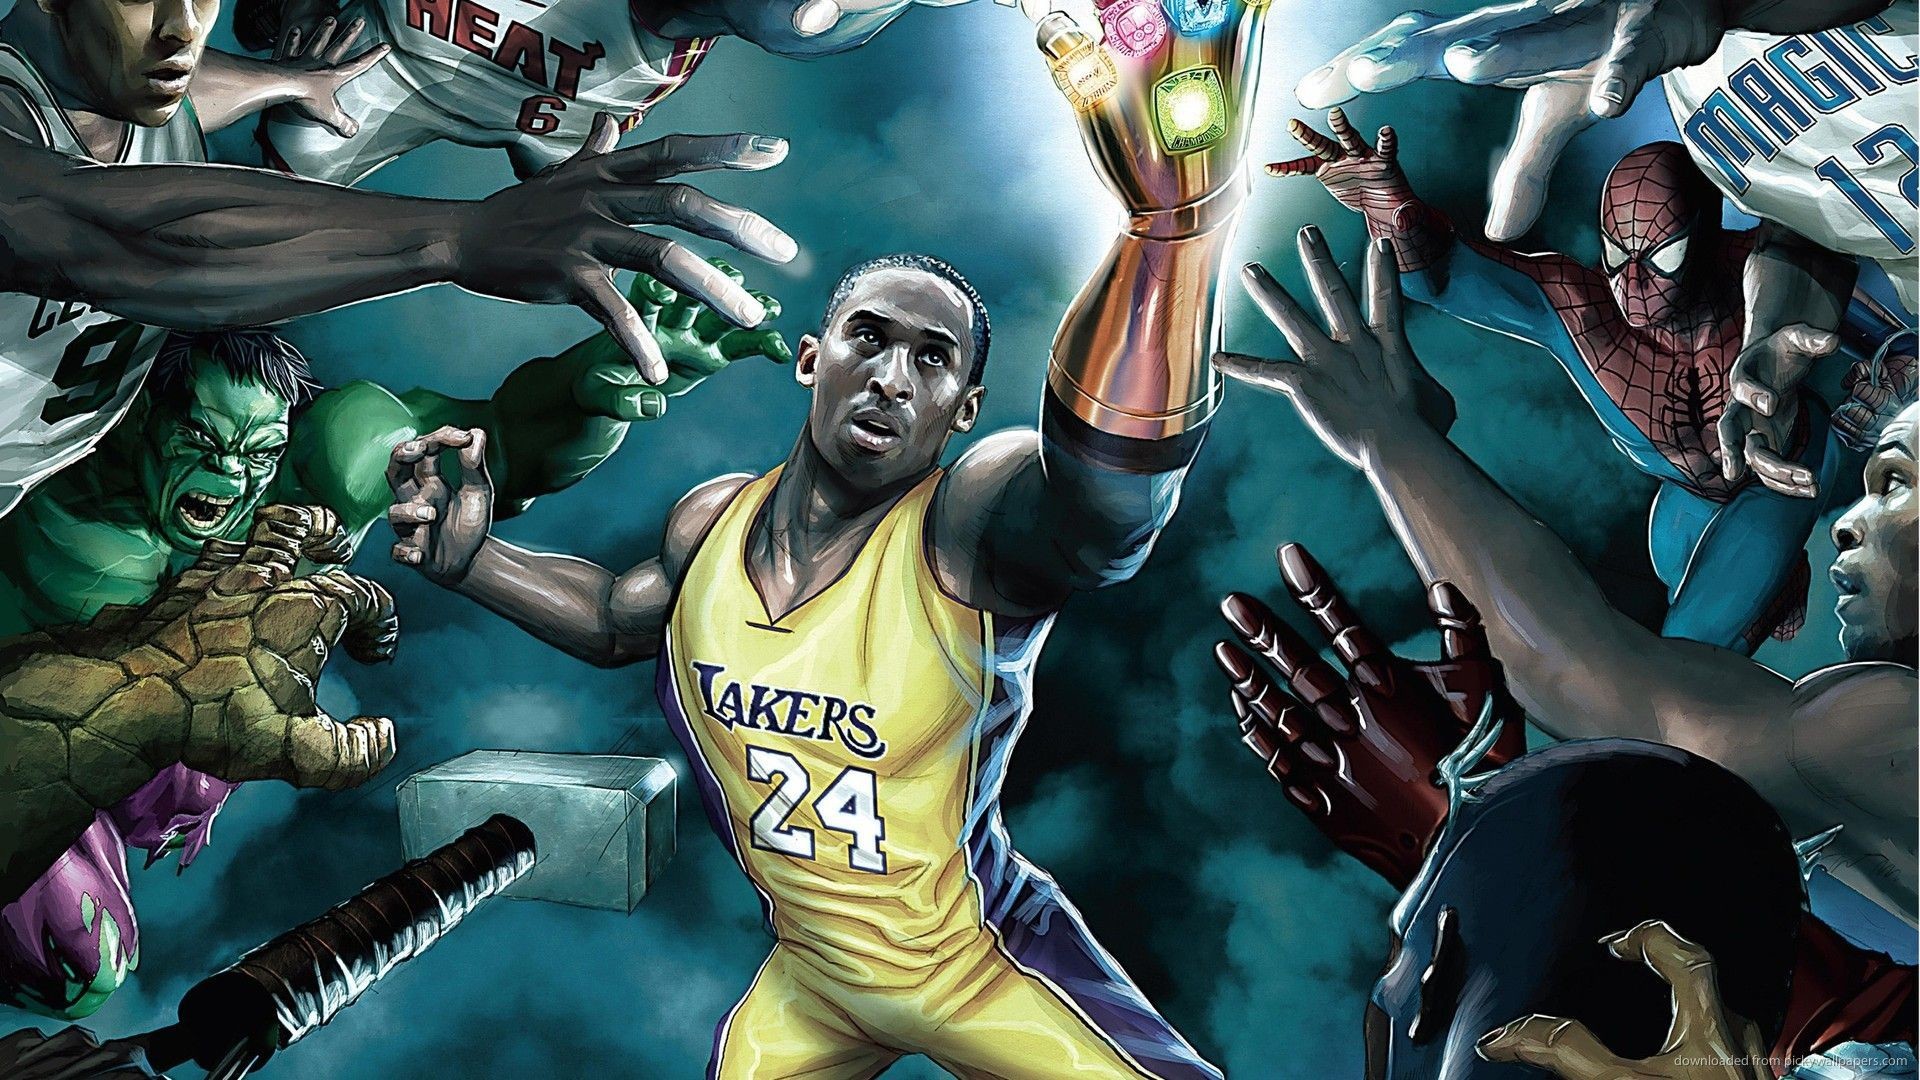 power moves' featuring basketball players, kobe bryant & lebron james & marvel super heroes